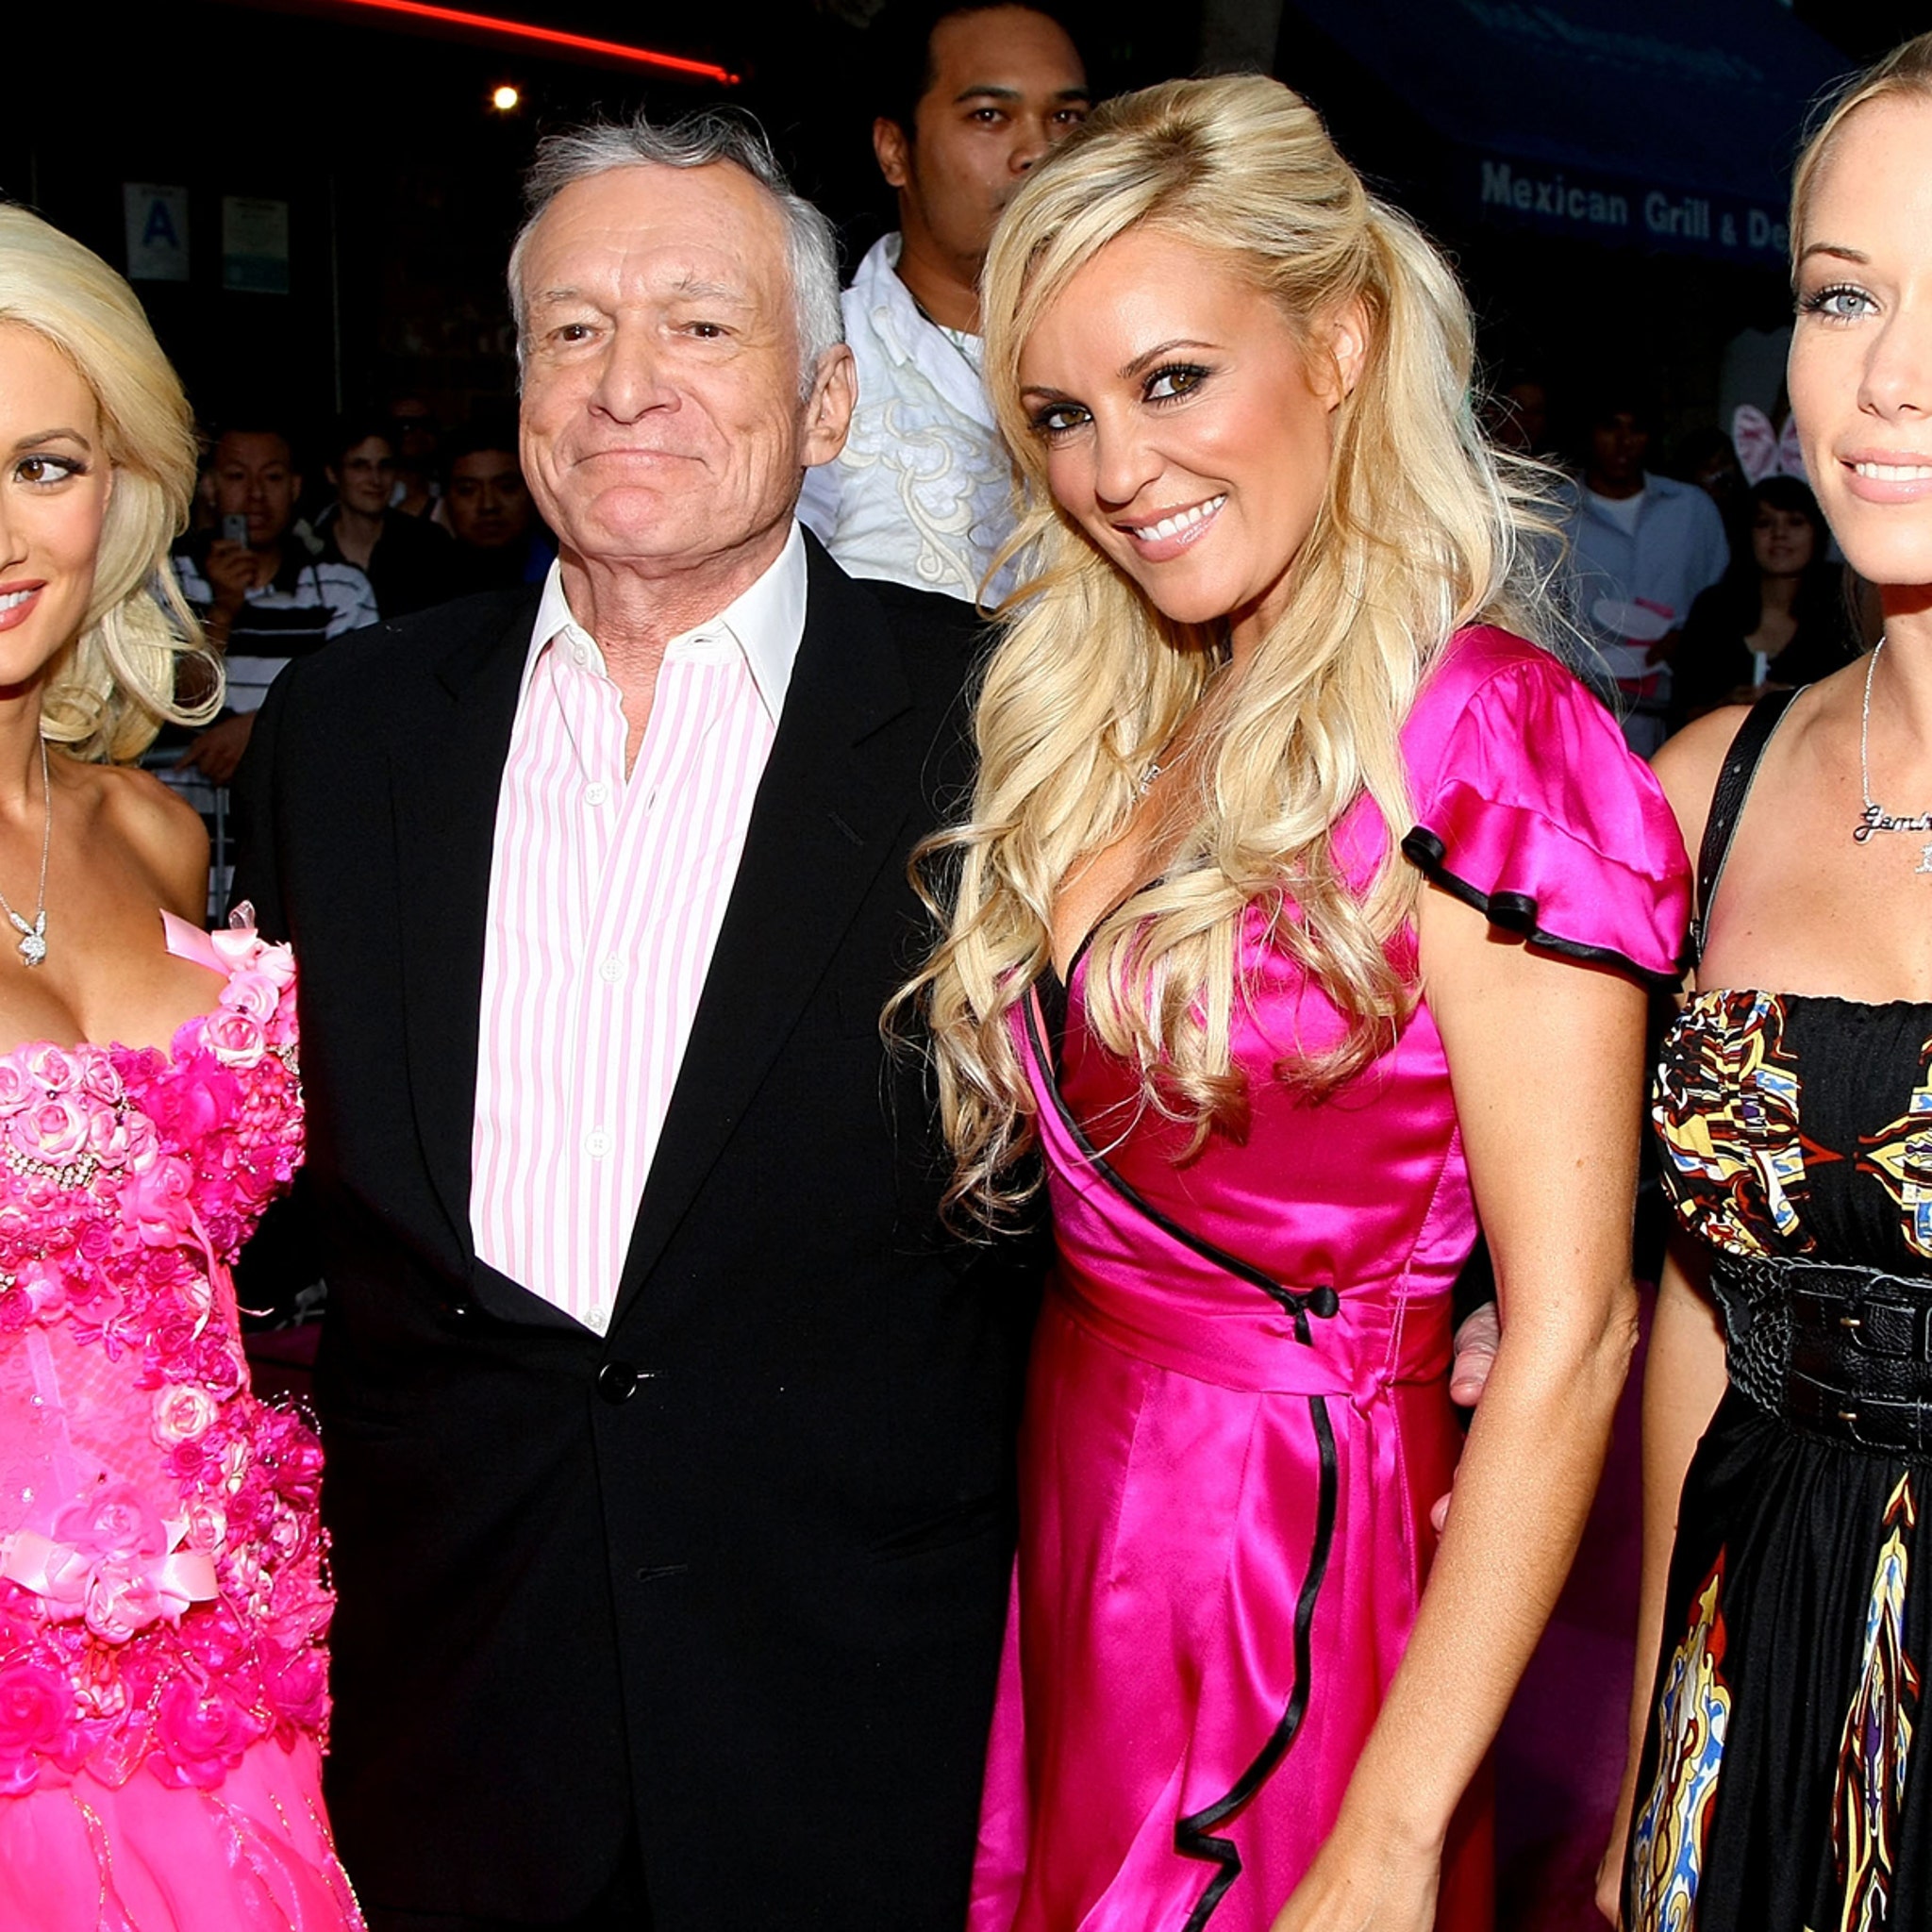 Holly Madison and Bridget Marquardt Reveal Playboy Mansion Rules and Hefs Manipulation Tactics photo